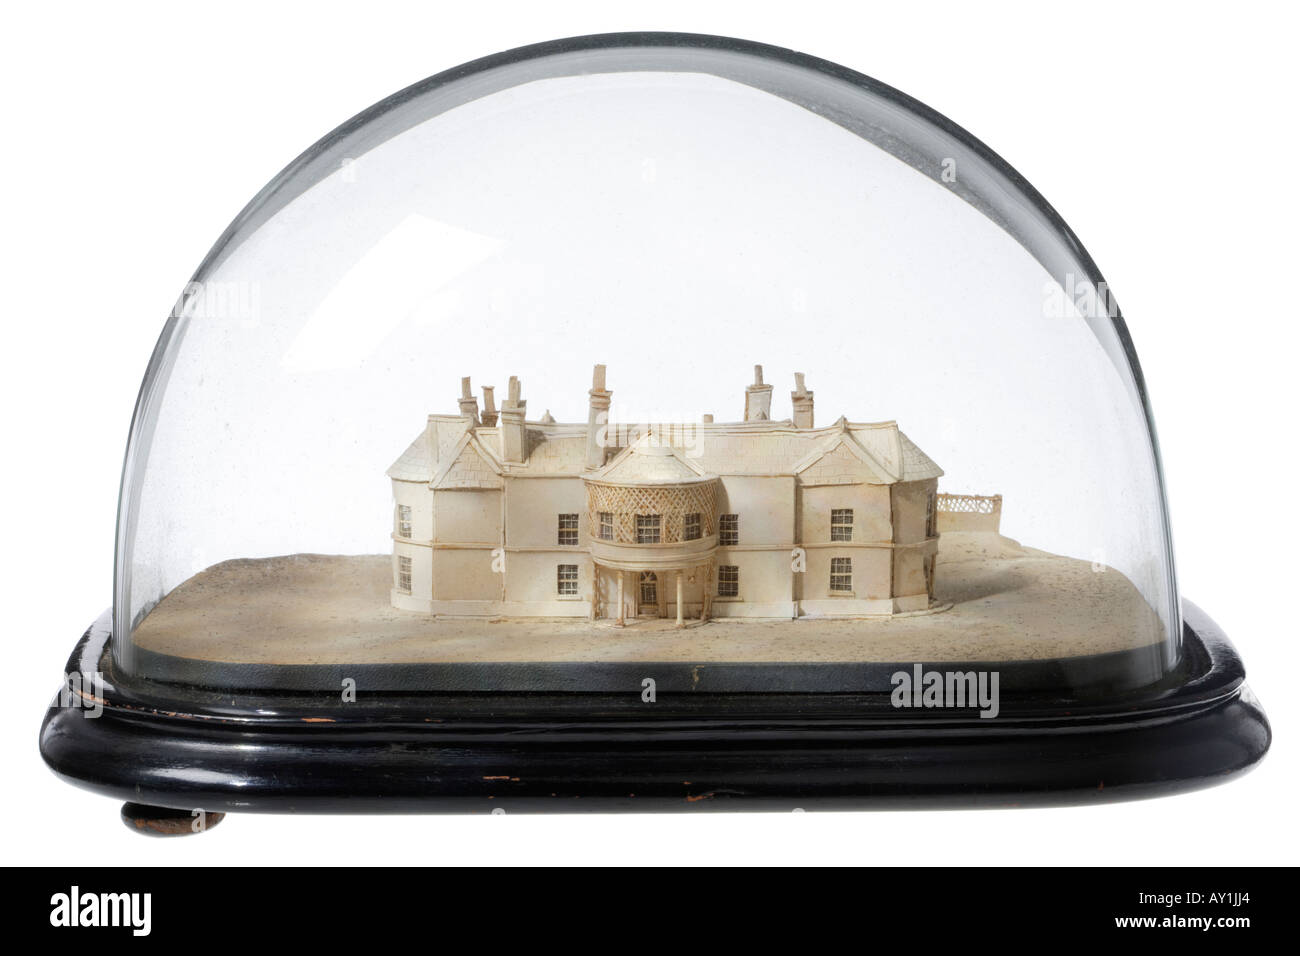 Victorian model of an English house under a glass dome Stock Photo